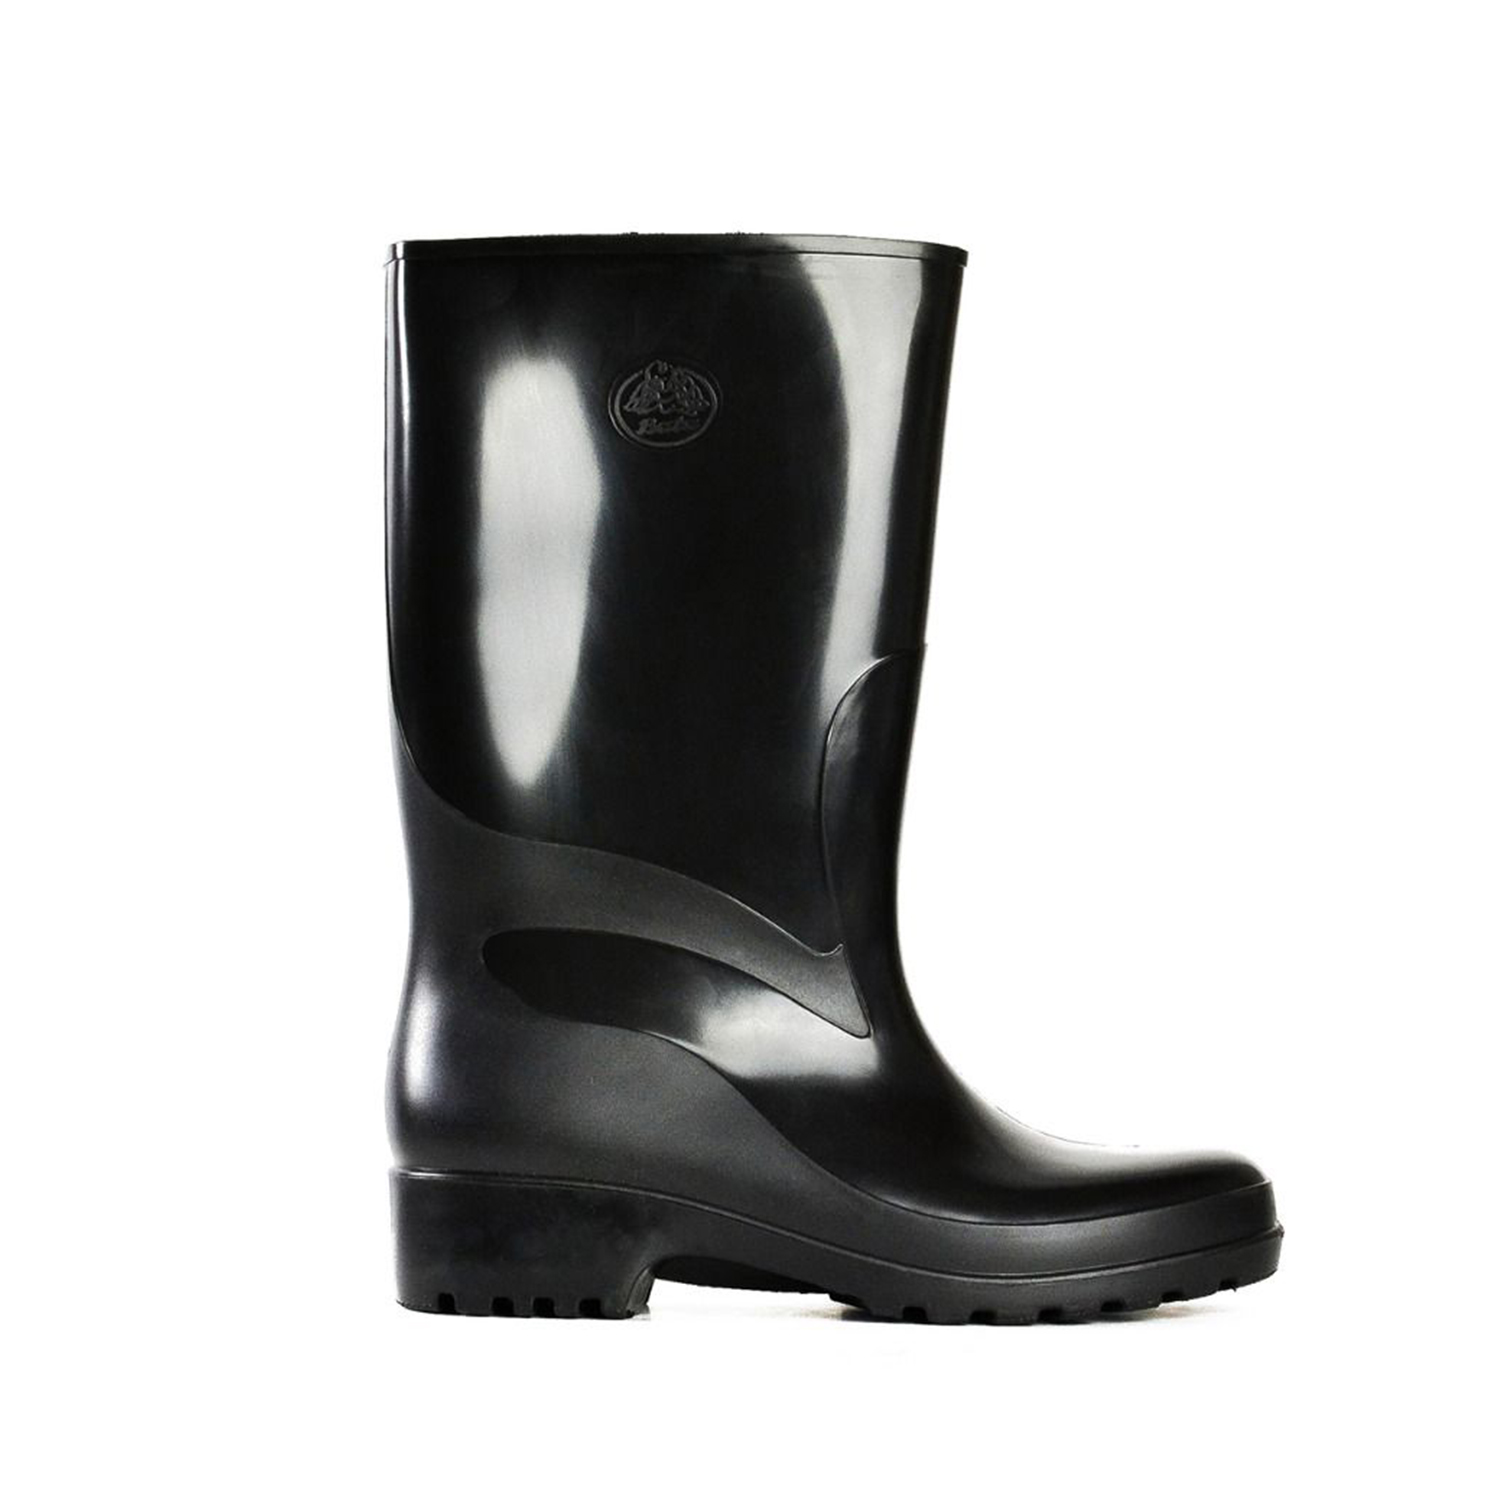 Ladies Youth Boots Bata WeatherGuard Gumboots Midcalf Length Wellies ...